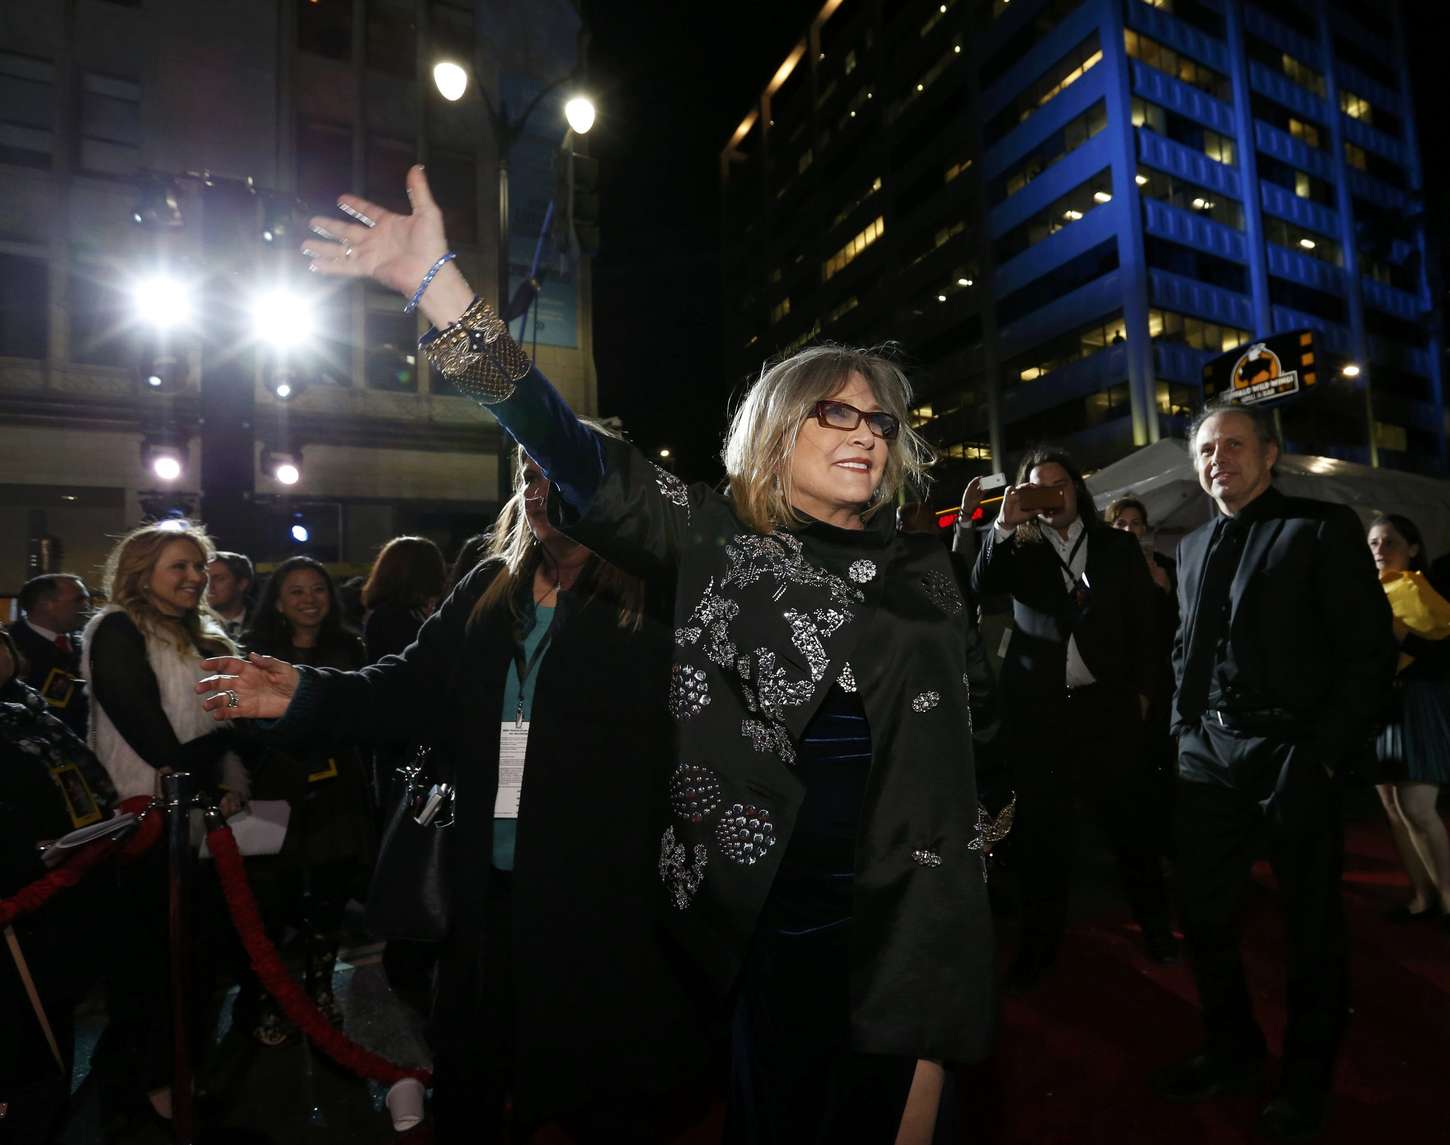 Carrie Fisher Star Wars The Force Awakens world premiere at the TCL Chinese Theatre